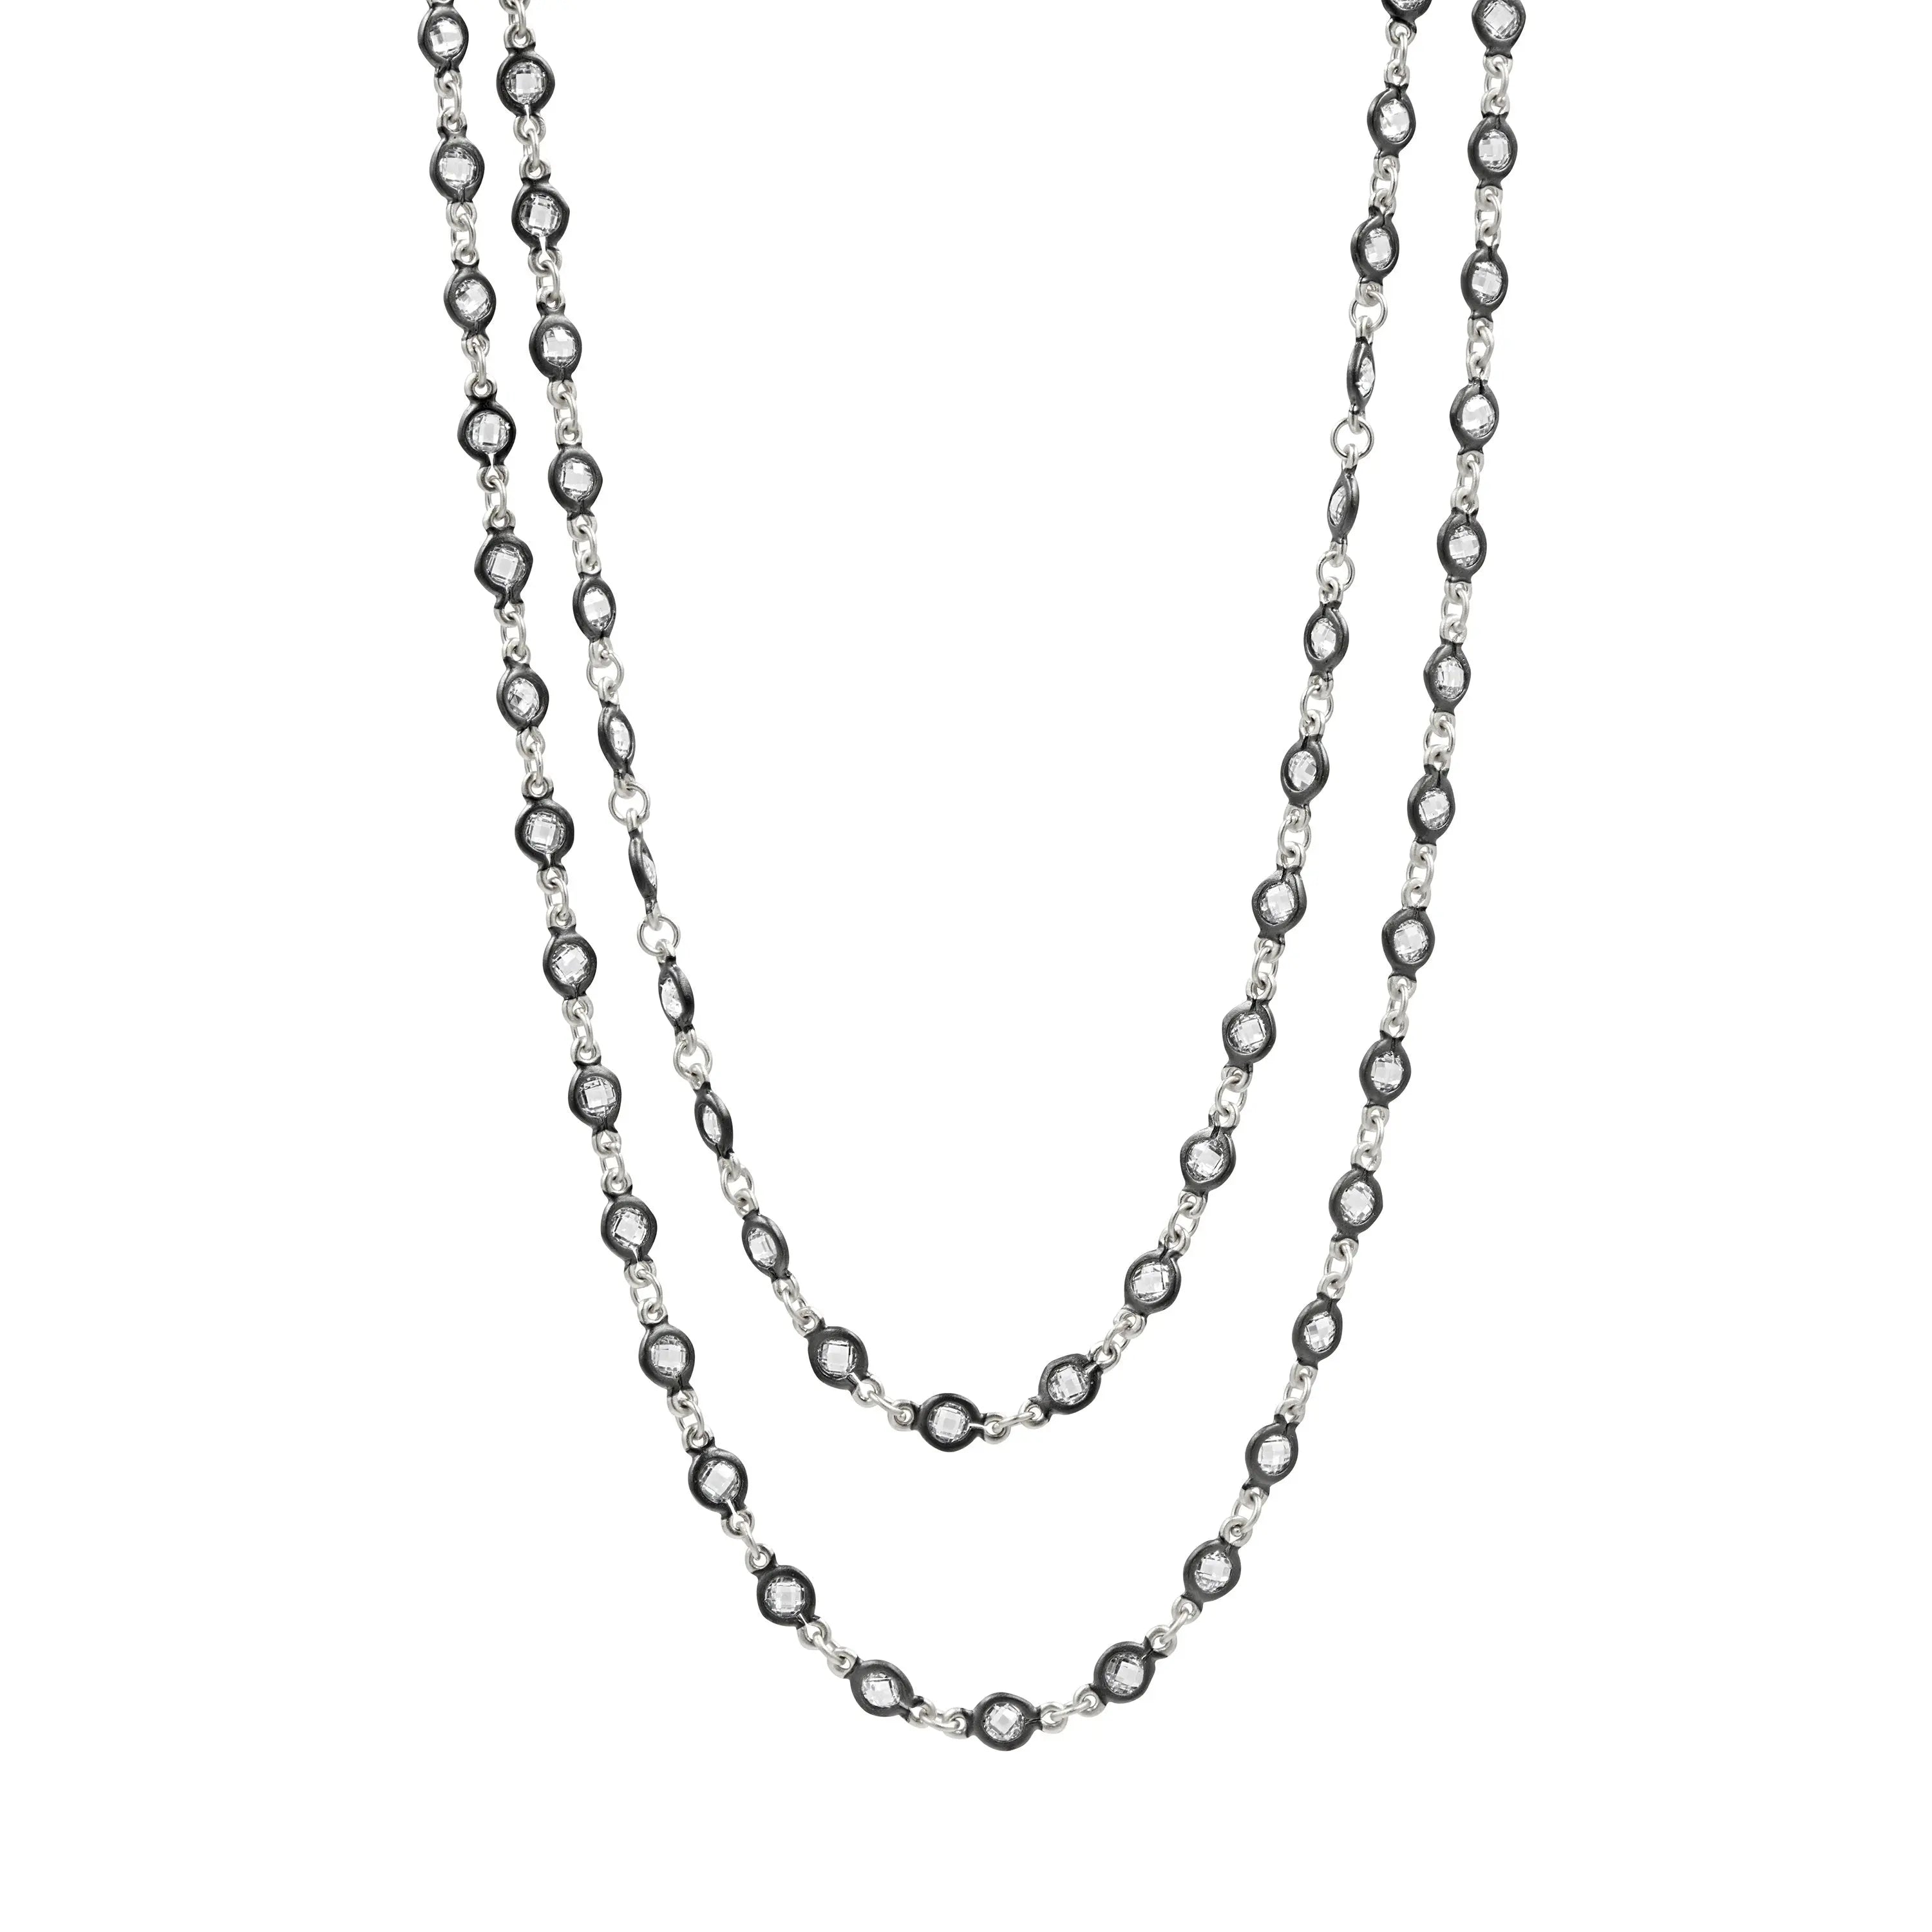 Armory Chain Necklace in Sterling Silver, 8.4mm | David Yurman